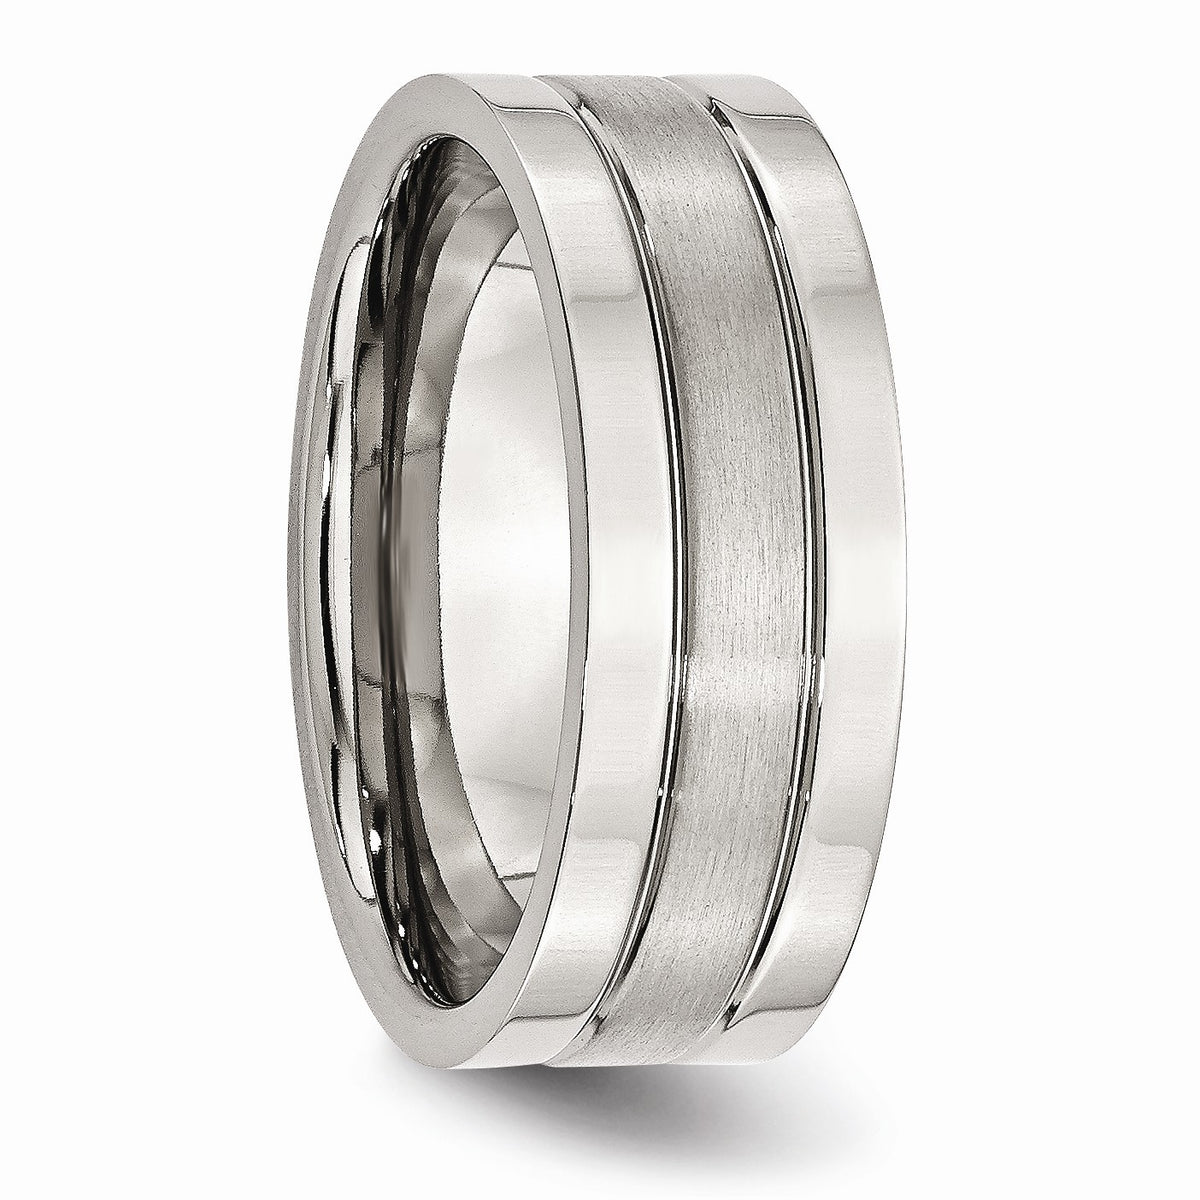 Alternate view of the Stainless Steel, 8mm Flat Grooved Unisex Comfort Fit Band by The Black Bow Jewelry Co.